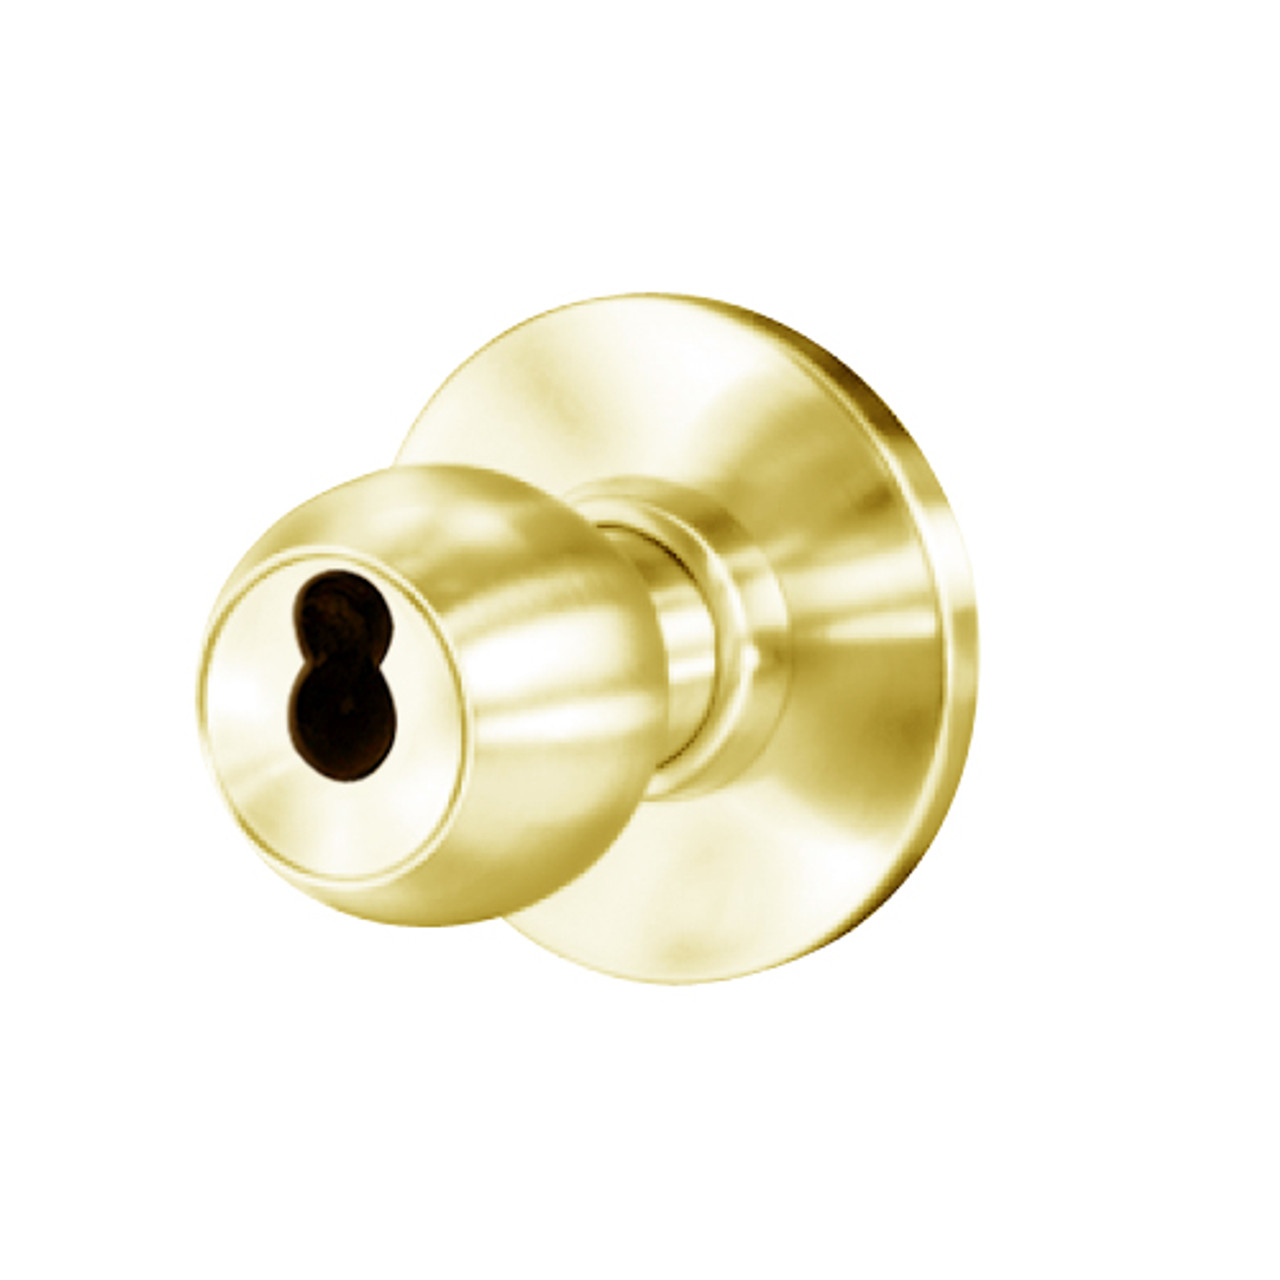 8K37XR4AS3605 Best 8K Series Special Heavy Duty Cylindrical Knob Locks with Round Style in Bright Brass